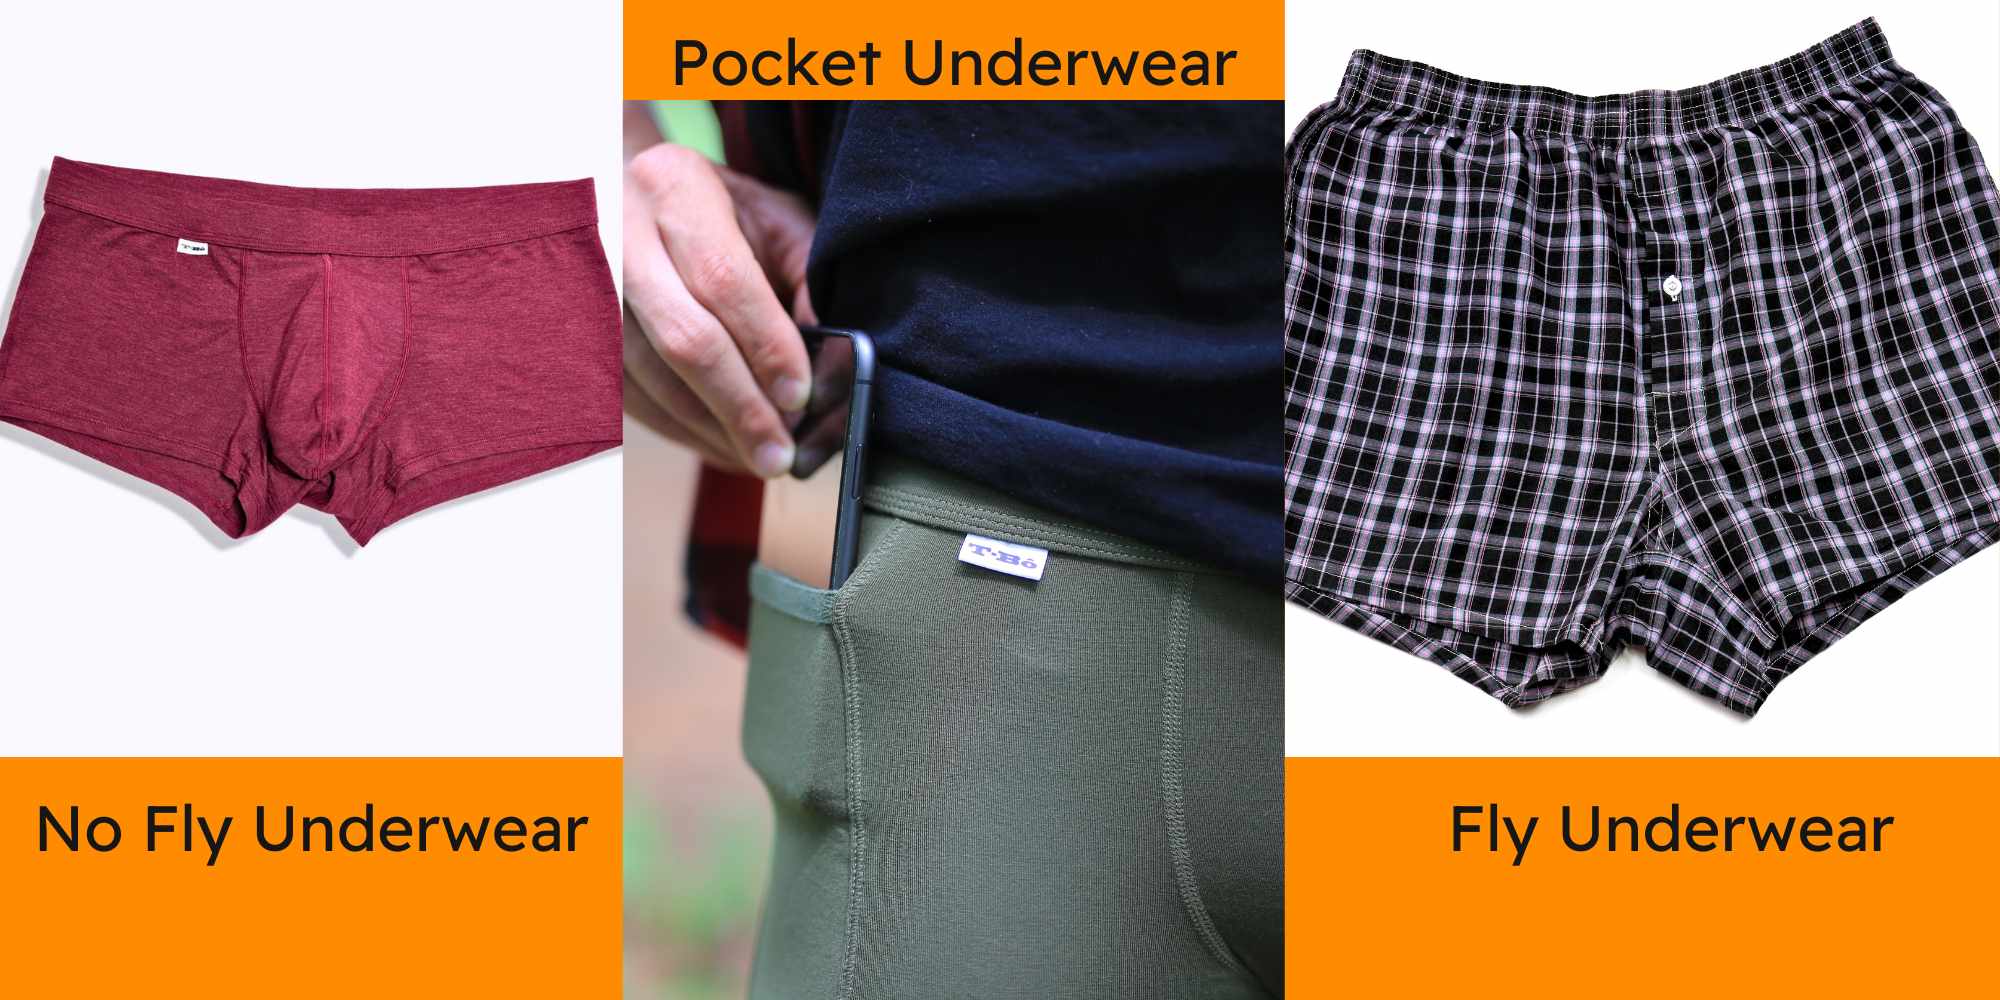 https://cdn.shopify.com/s/files/1/1409/3172/files/Why_do_Men_s_Underwear_Have_a_Hole_in_the_Front.jpg?v=1706186261